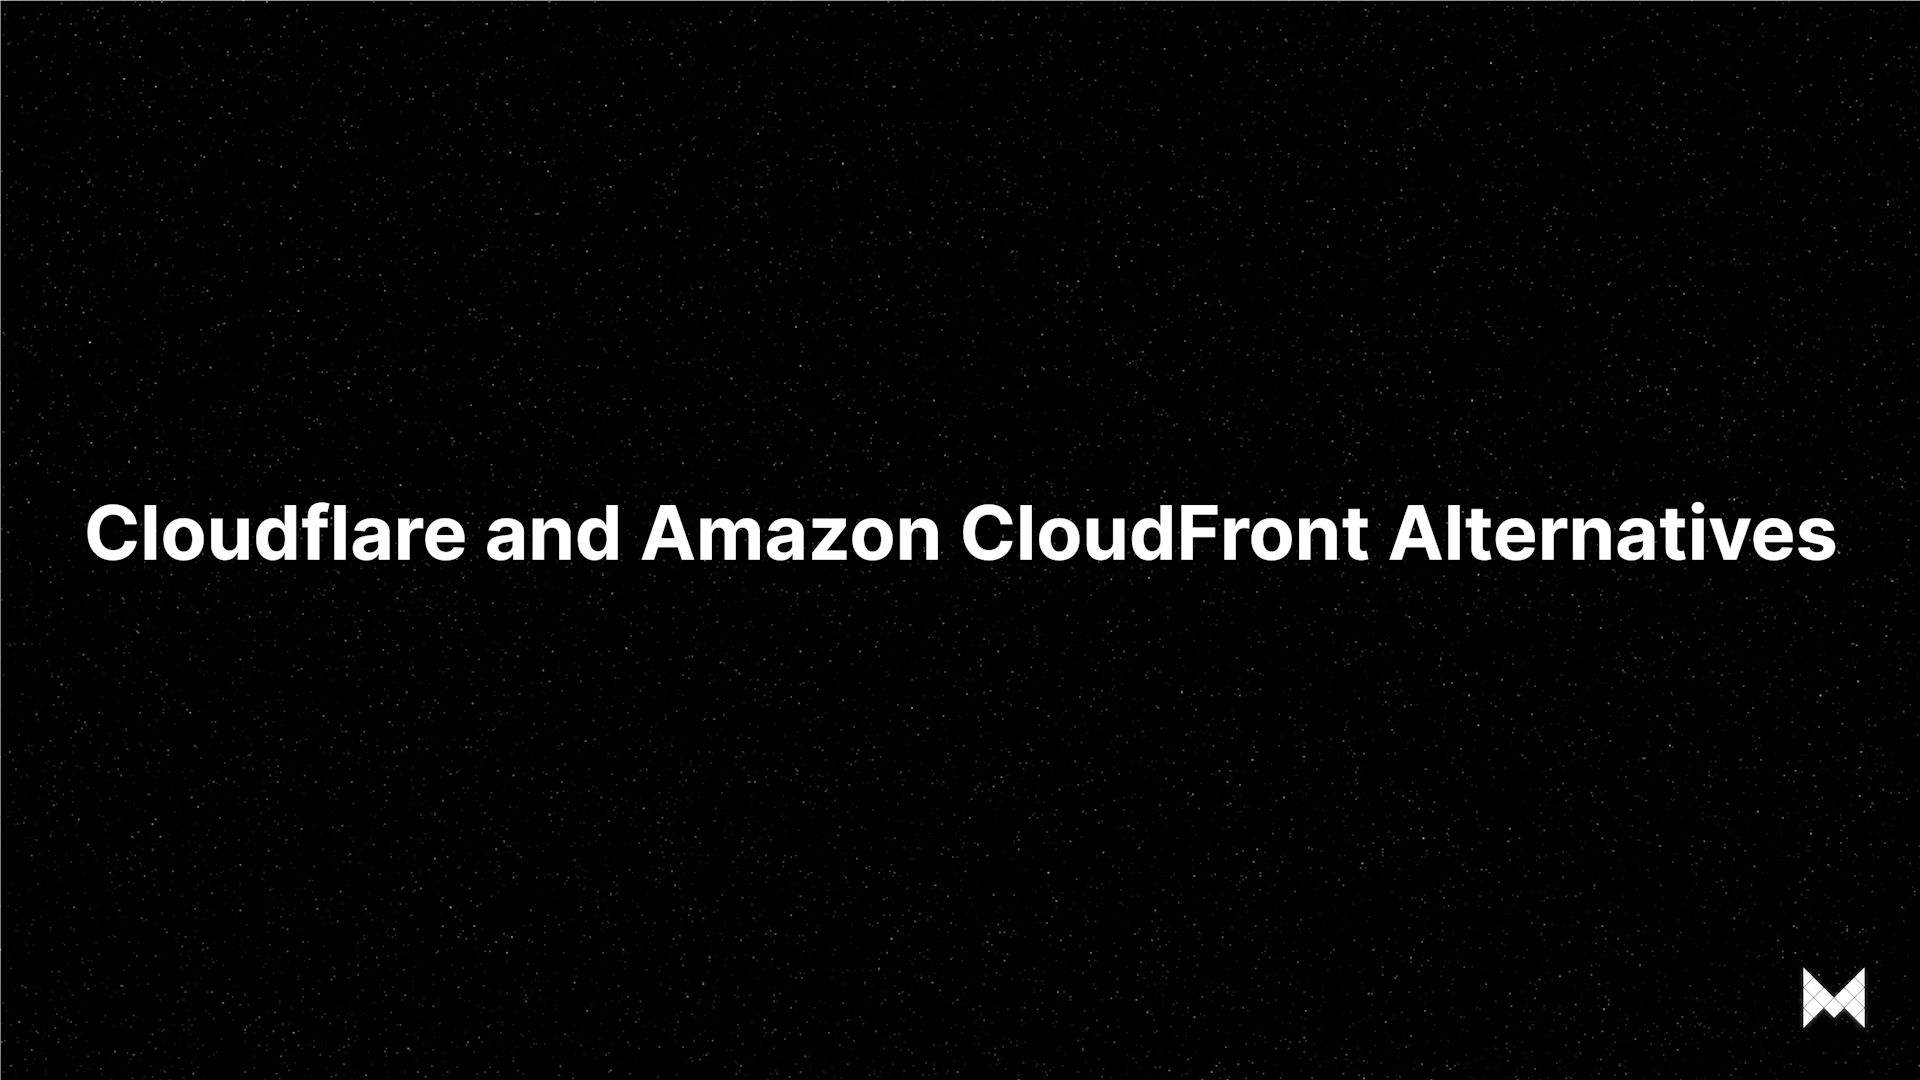 Cloudflare and Amazon CloudFront Alternatives: What is a dCDN